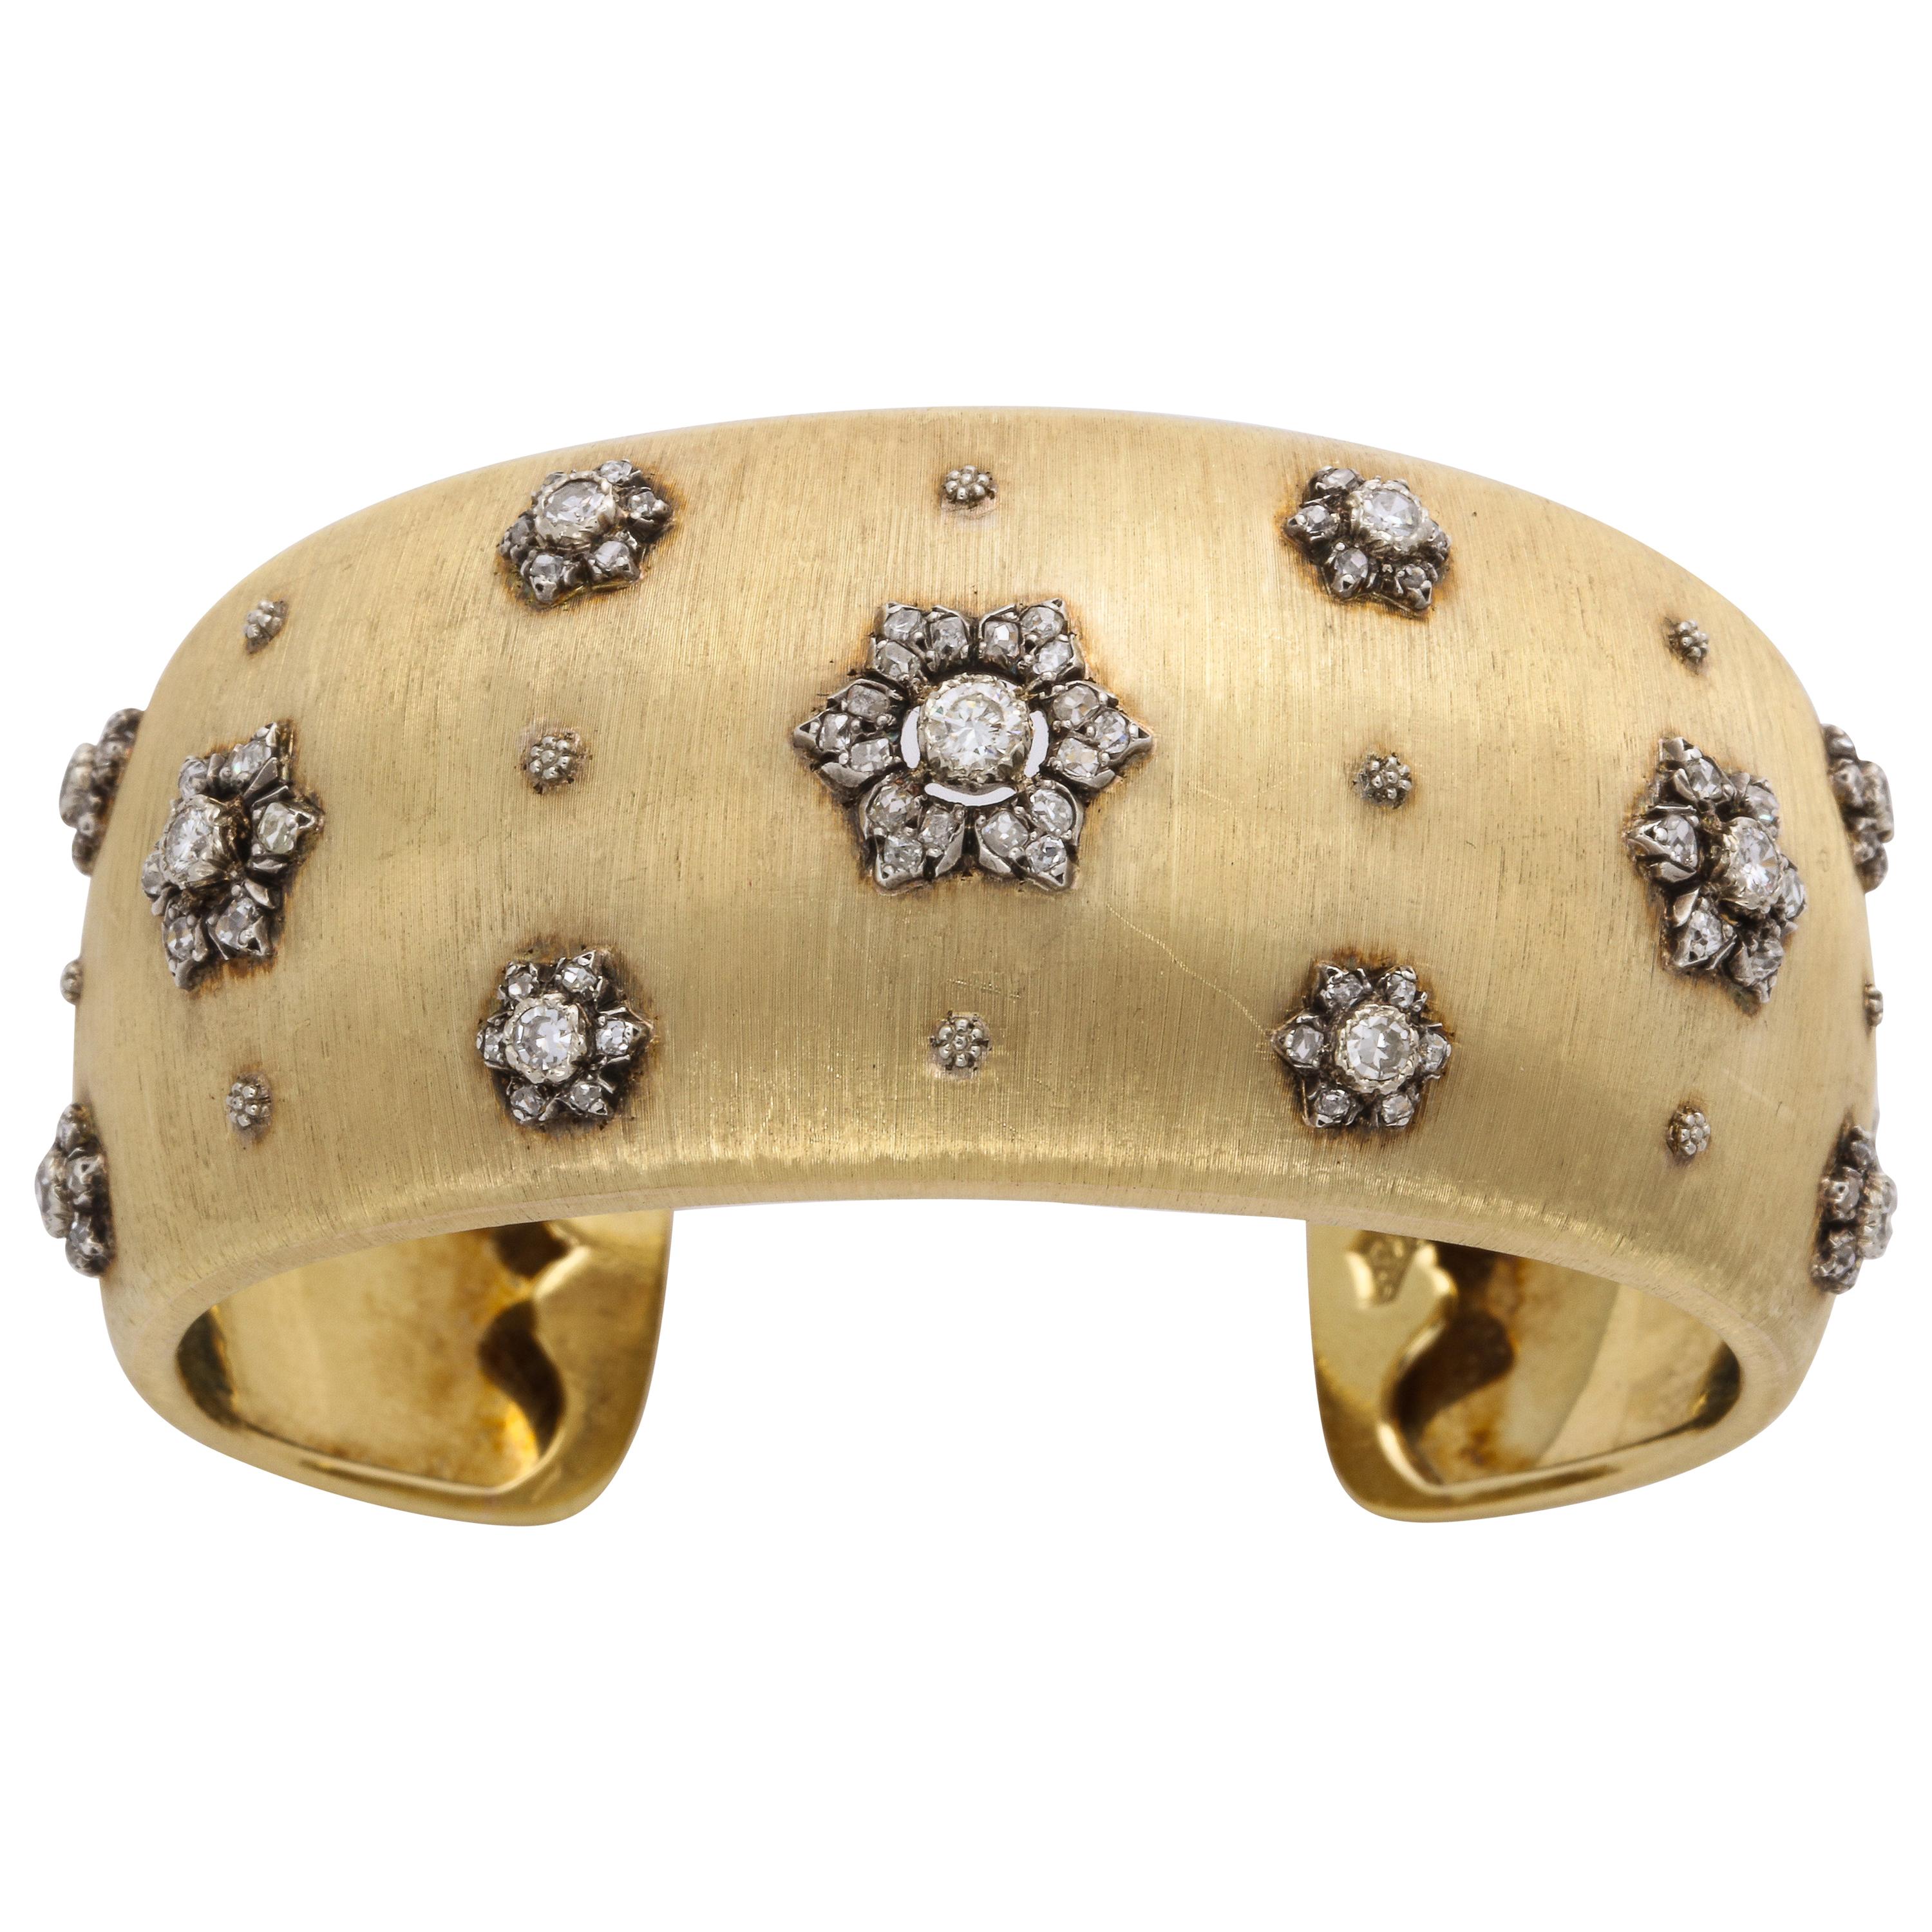 Early Mario Buccellati Gold and Diamond Cuff Bracelet For Sale